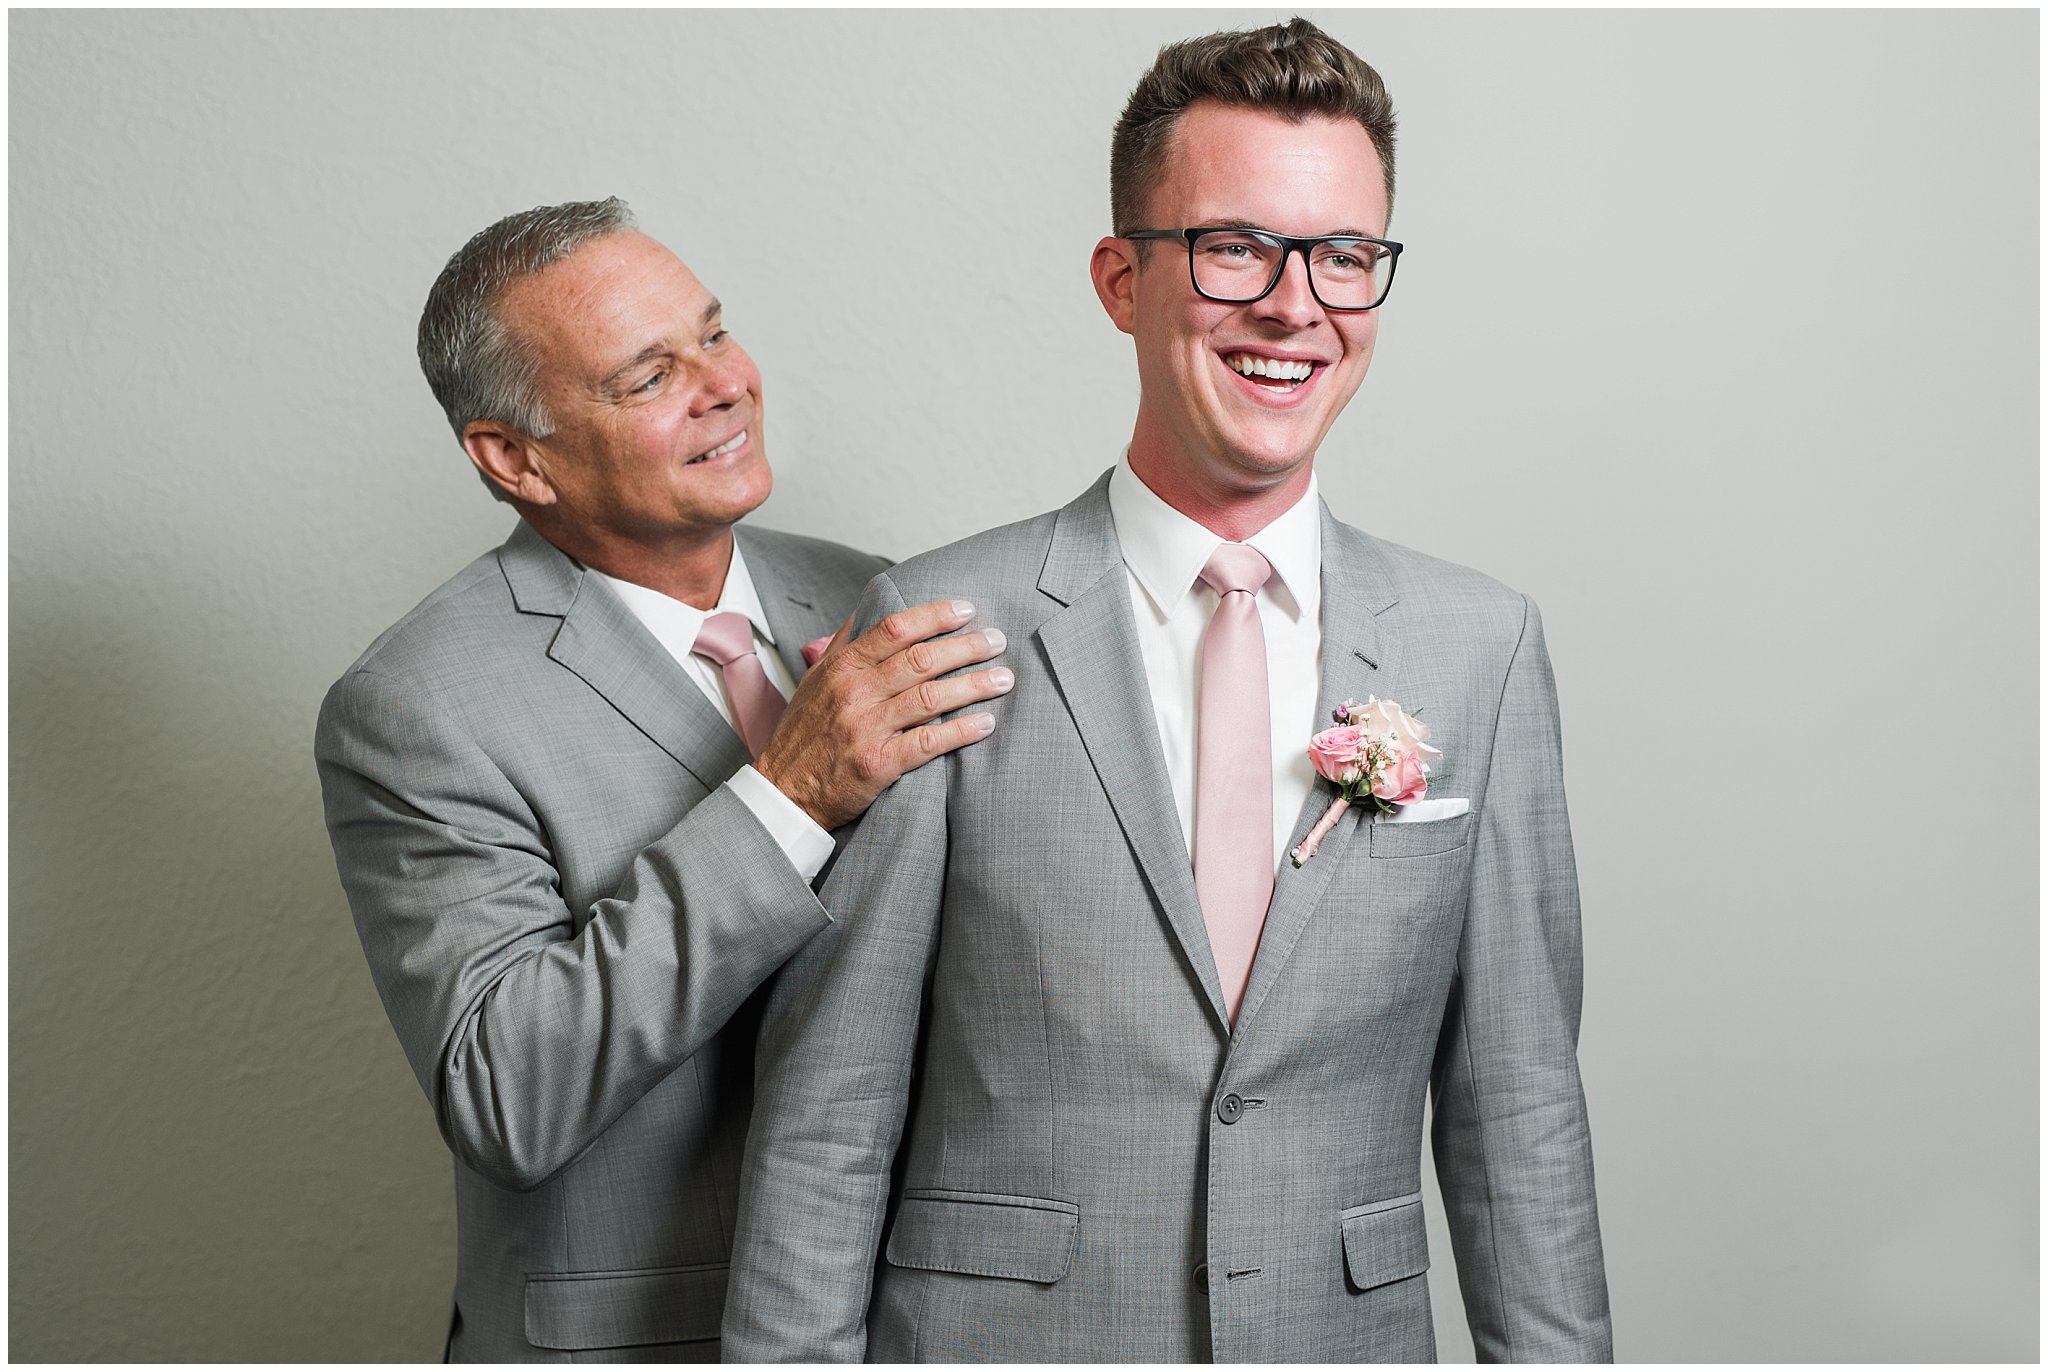 Groom with Dad in gray suit and blush tie portrait | Oak Hills Utah Dusty Rose and Gray Summer Wedding | Jessie and Dallin Photography